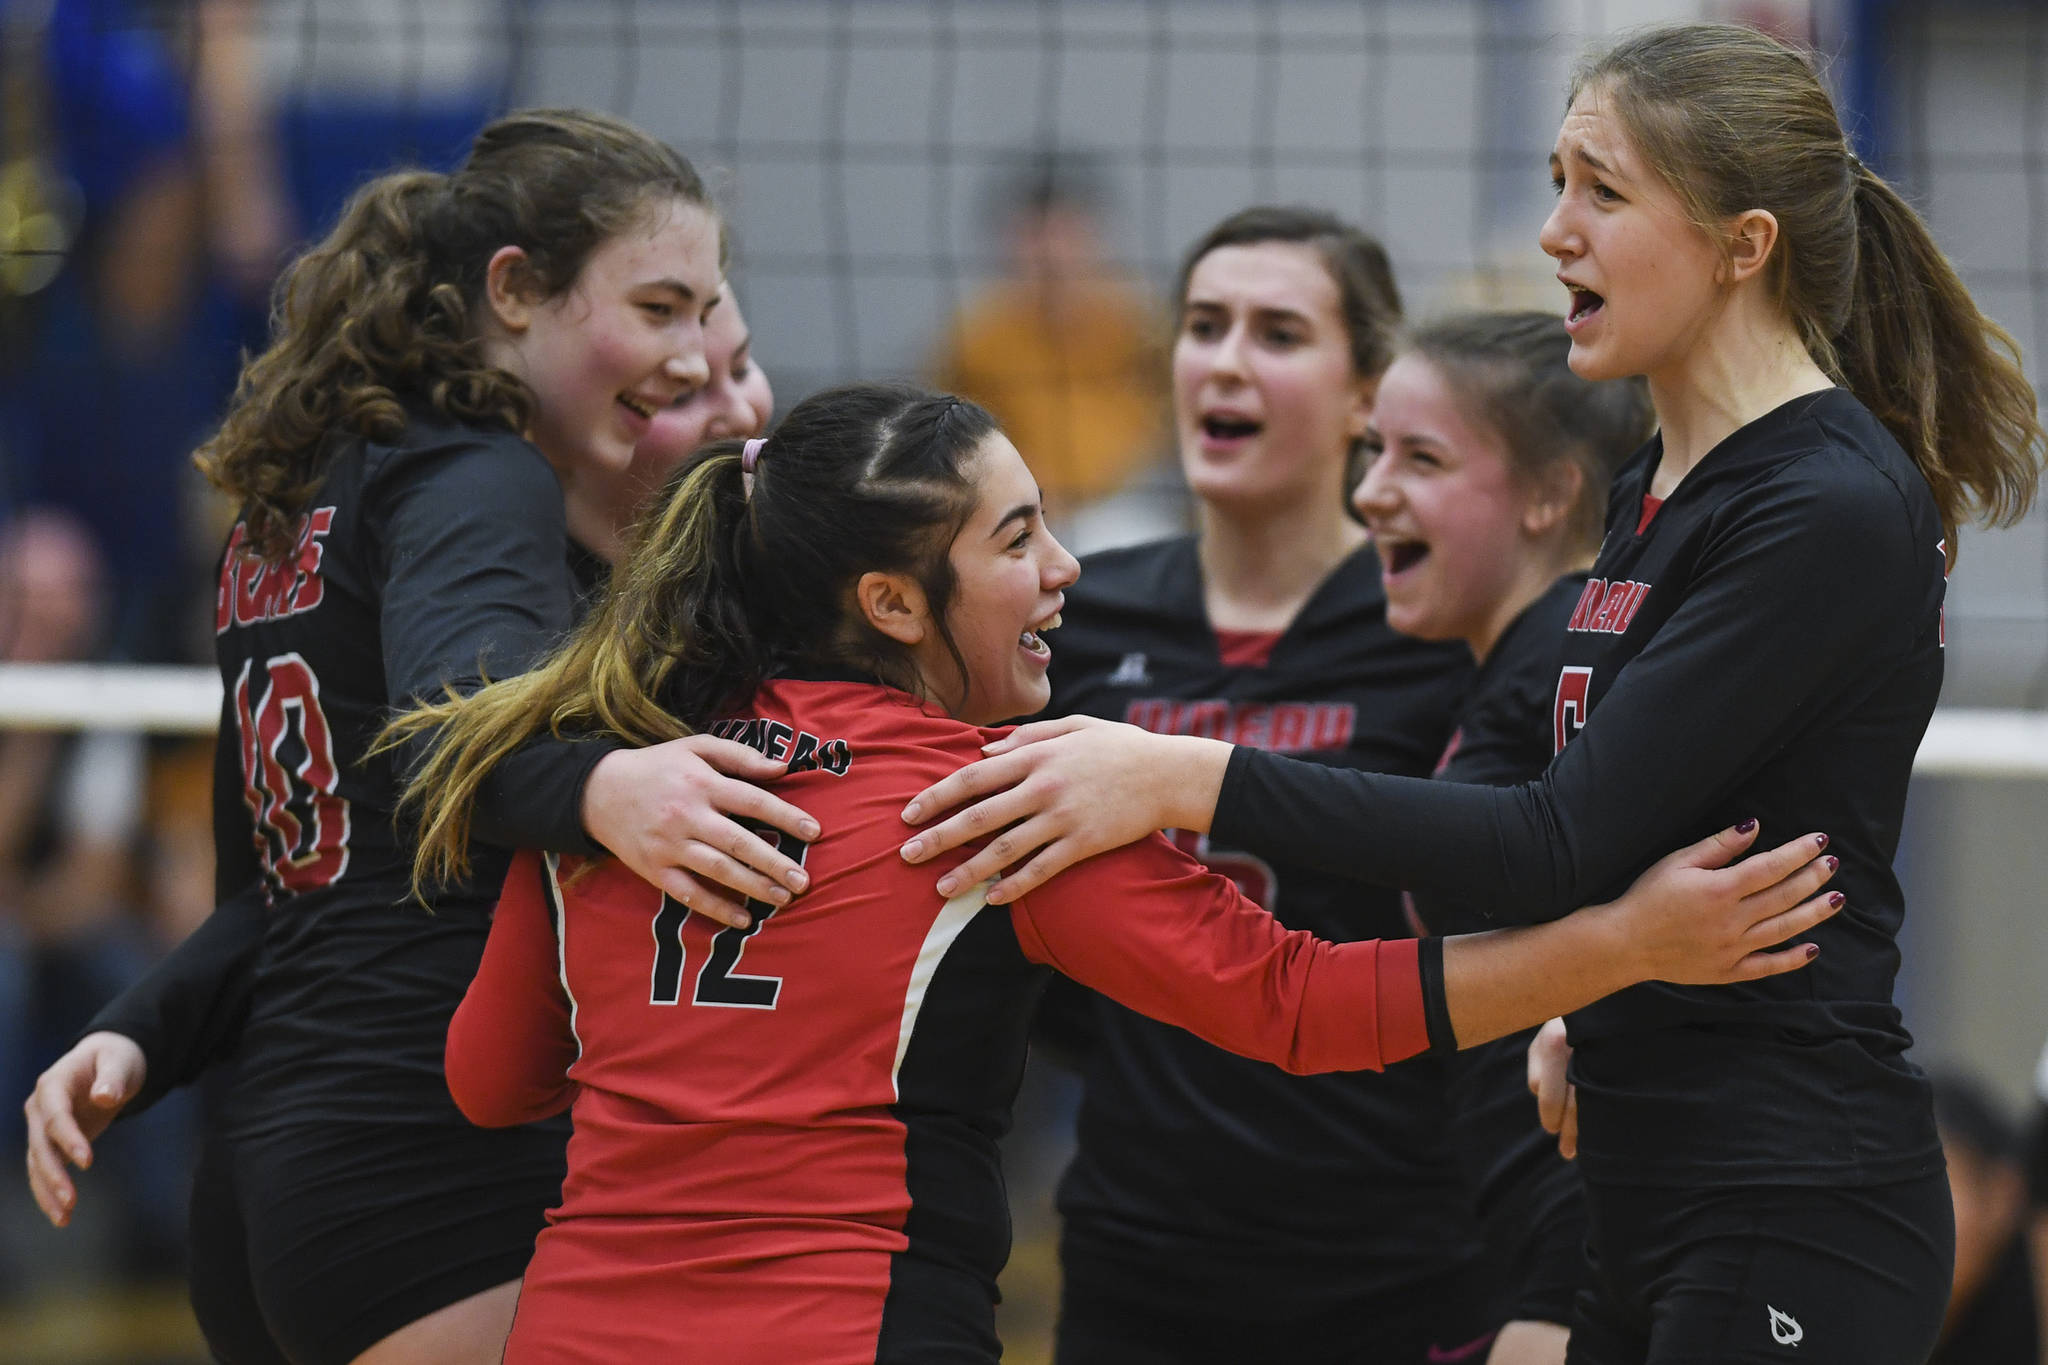 Juneau-Douglas’ Paige Adams, center, celebrates a point with her teammates against Thunder Mountain during the Region V Volleyball Tournament at Thunder Mountain High School on Friday, Nov. 8, 2019. JDHS won 3-0 (25-22, 26-24, 25-20). (Michael Penn | Juneau Empire File)